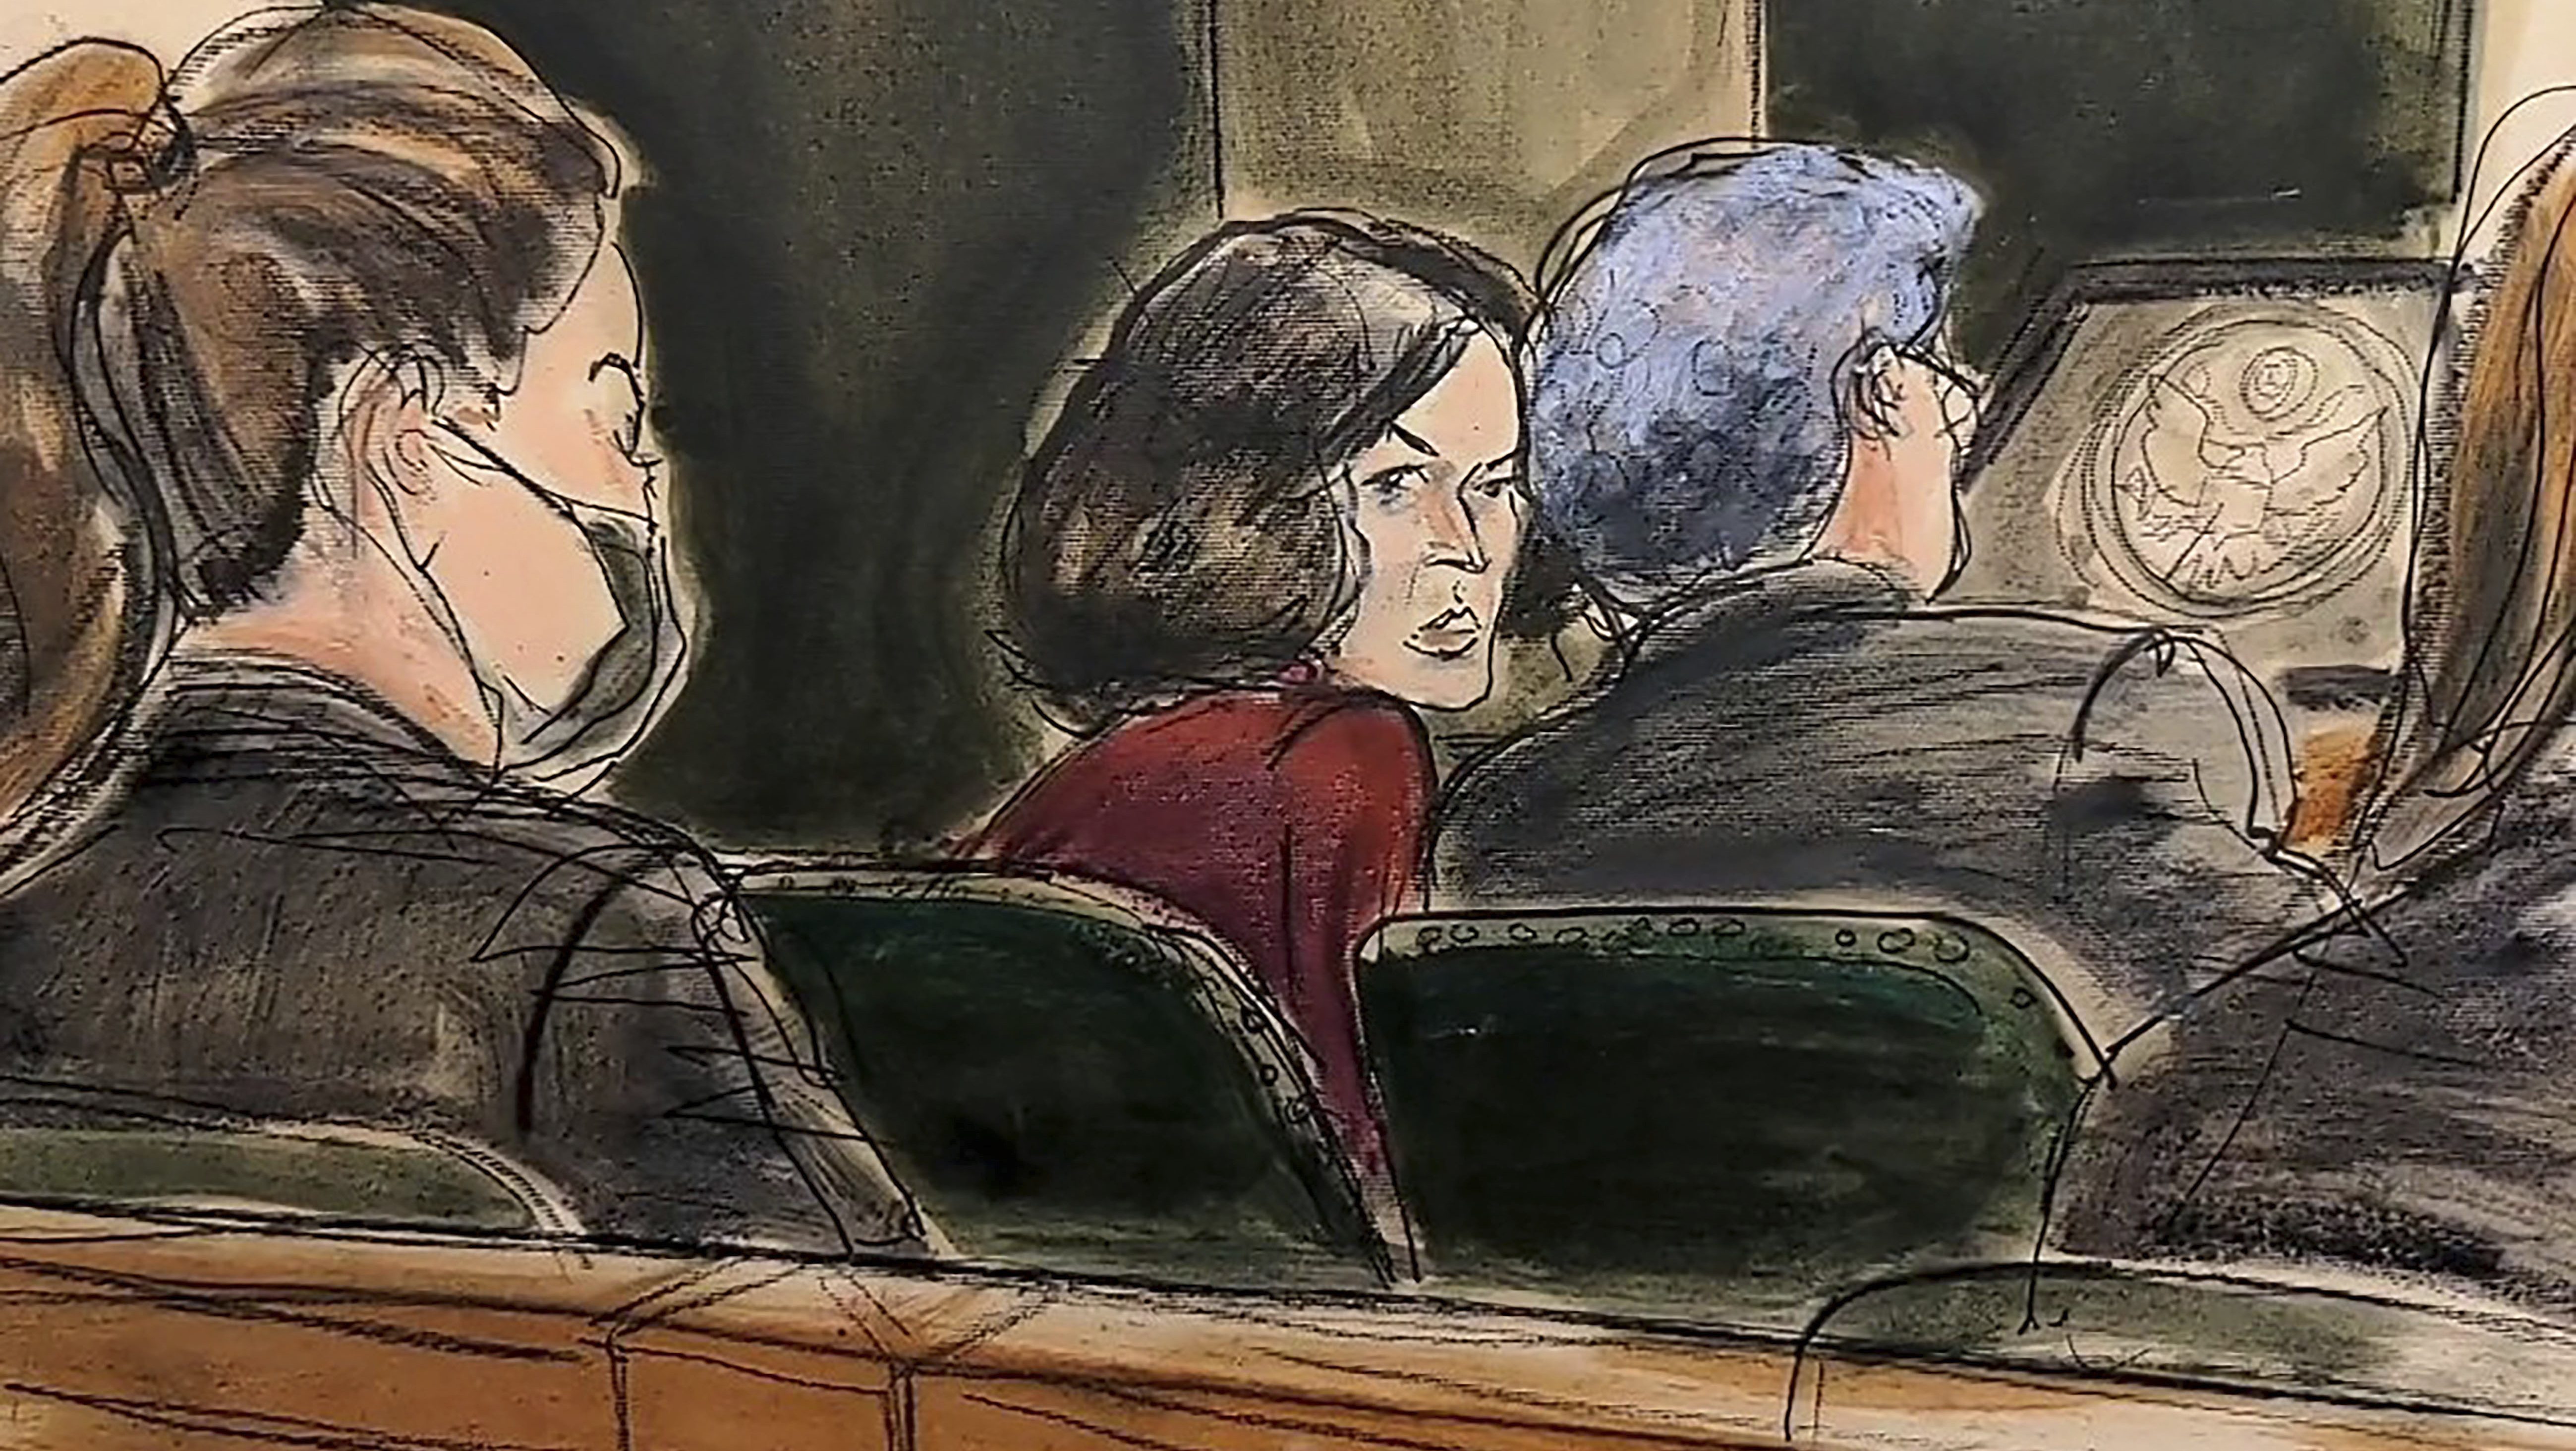 In this courtroom sketch, Ghislaine Maxwell center, confers with her defense attorney Jeffrey Pagliuca, right, before testimony begins in her sex-abuse trial, in New York, Wednesday, Dec. 8, 2021. Testimony continues in the trial of Ghislaine Maxwell, the British socialite accused of helping the millionaire Jeffrey Epstein sexually abuse underage girls.